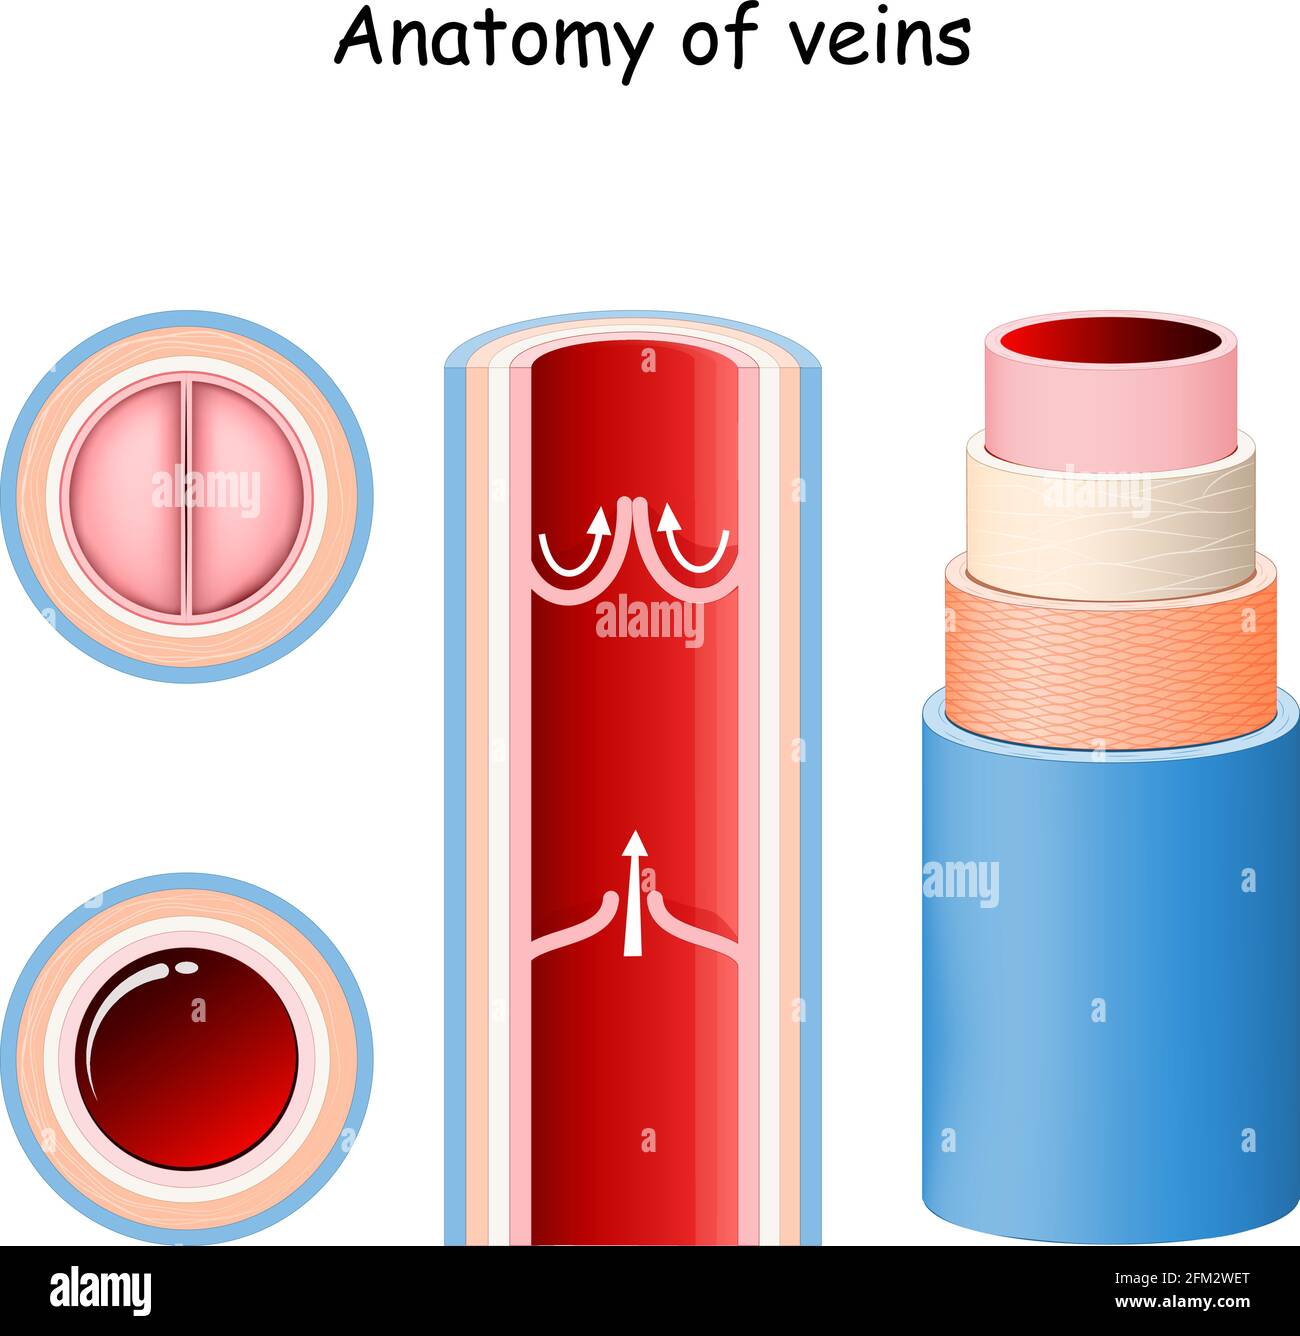 Anatomy of vein. Structure of blood vessel. Close-up of valves. longitudinal and cross section of vein. Vector illustration Stock Vector